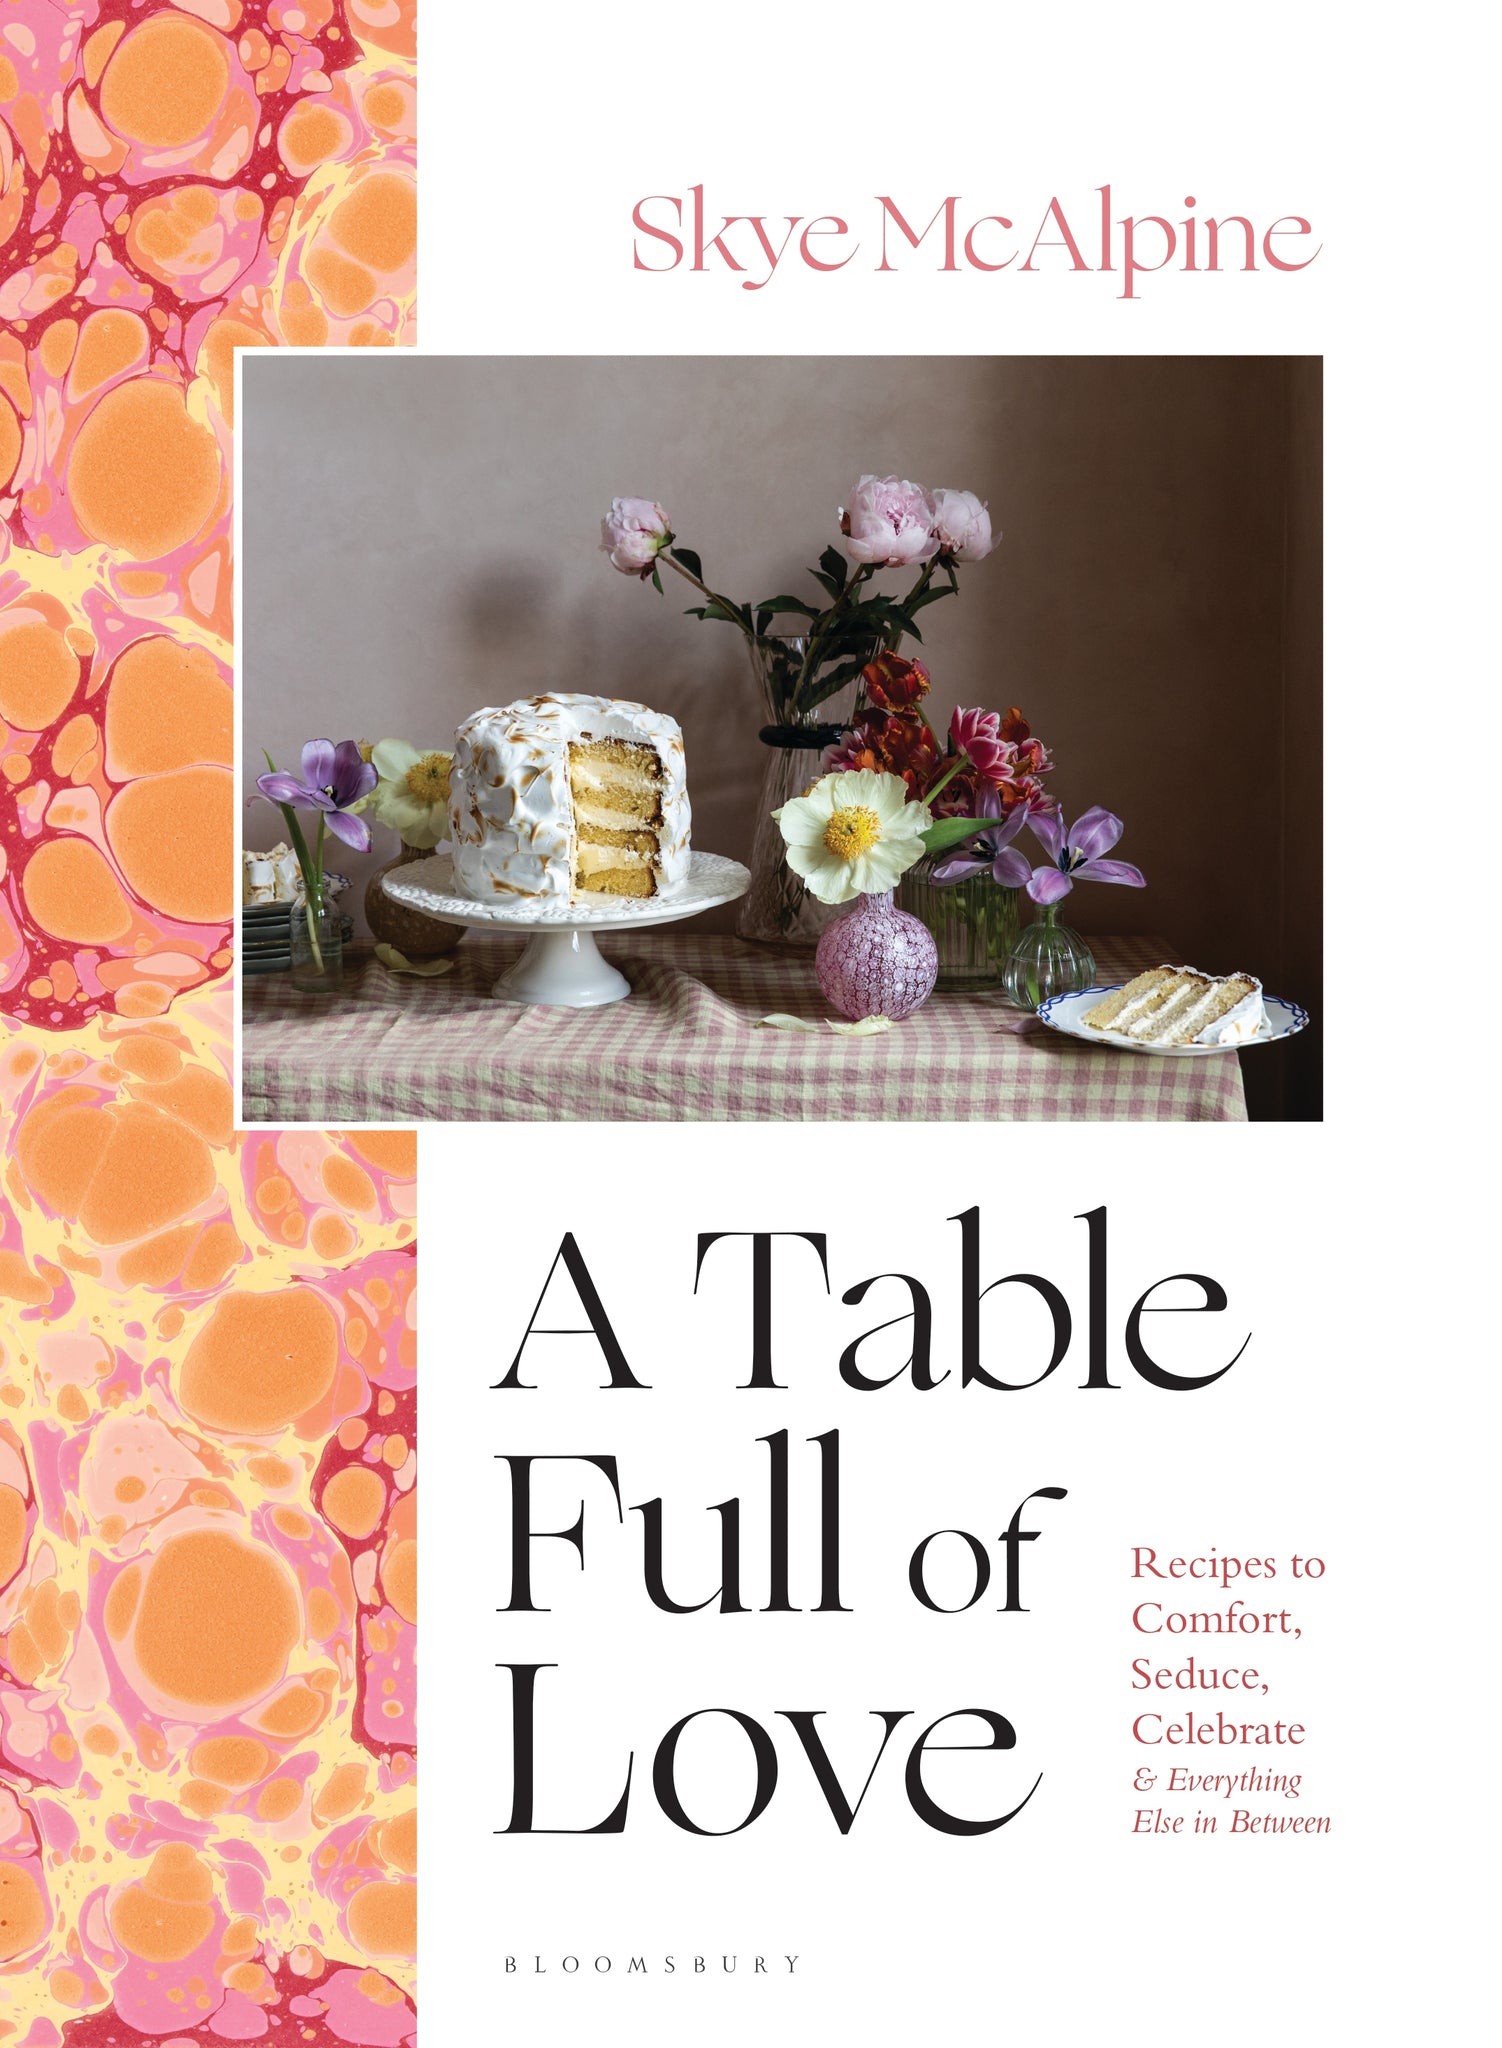 A Table Full of Love, signed and gift-wrapped - Skye McAlpine Tavola